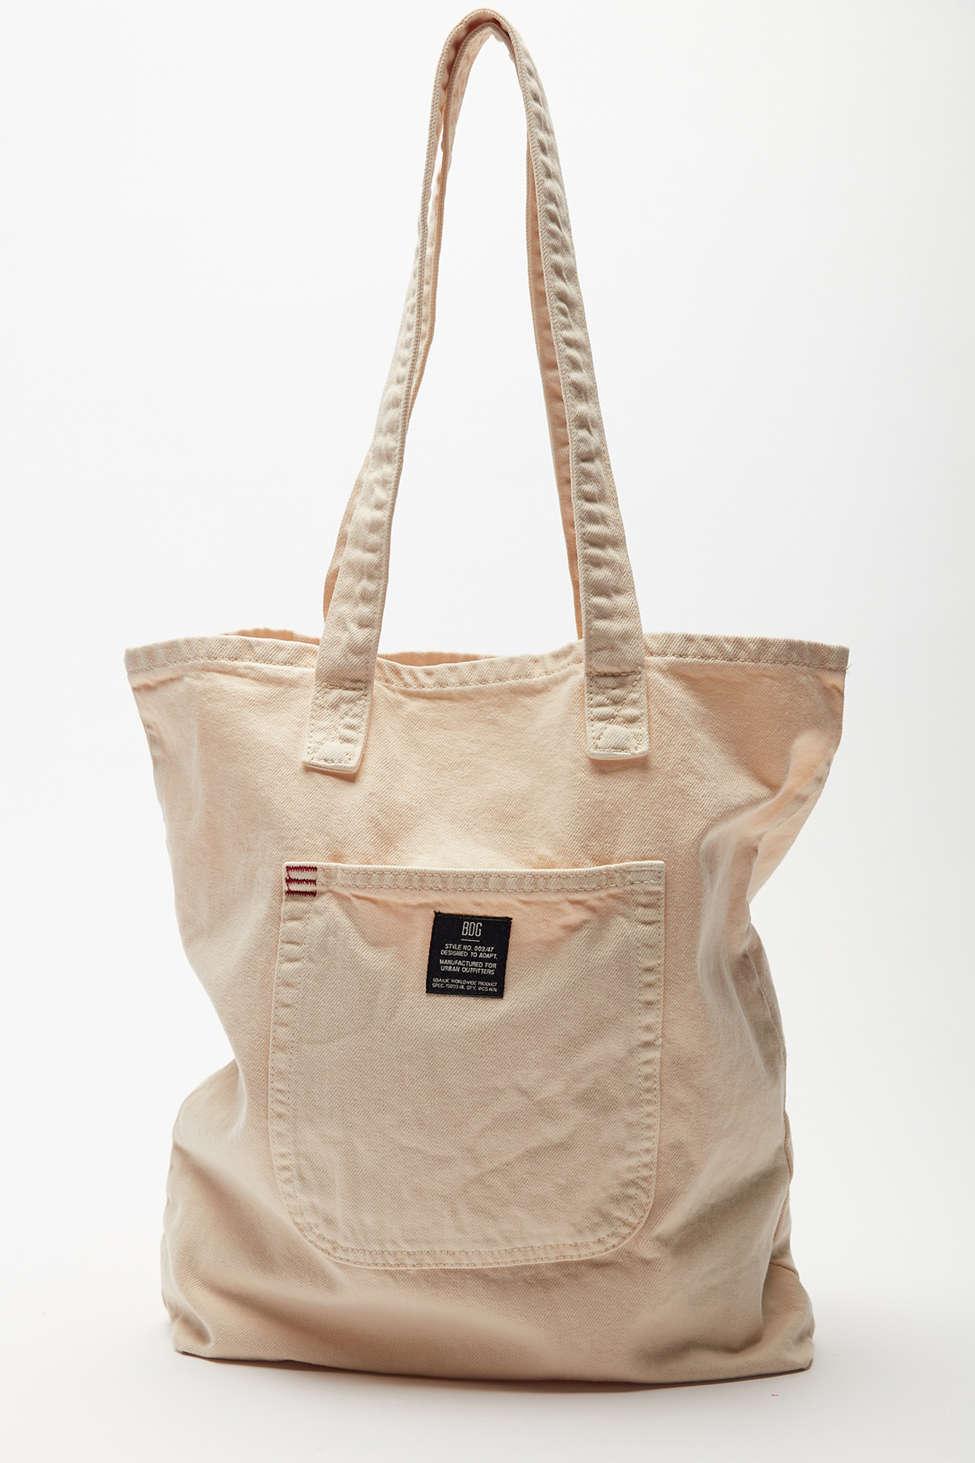 Discover more than 139 ivory tote bag best - esthdonghoadian